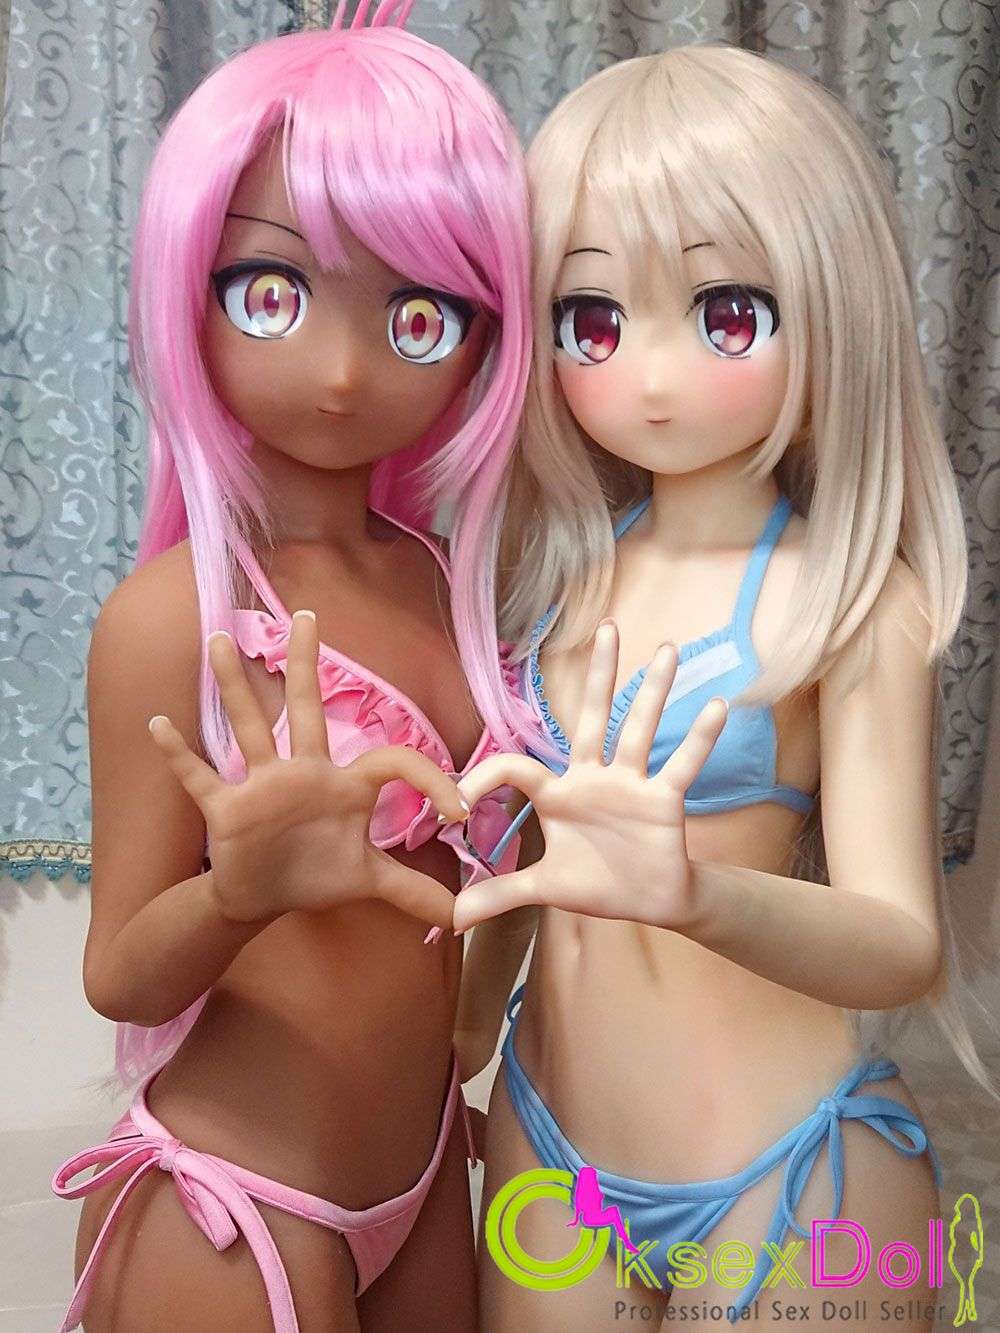 Red Eyes love dolls Pictures